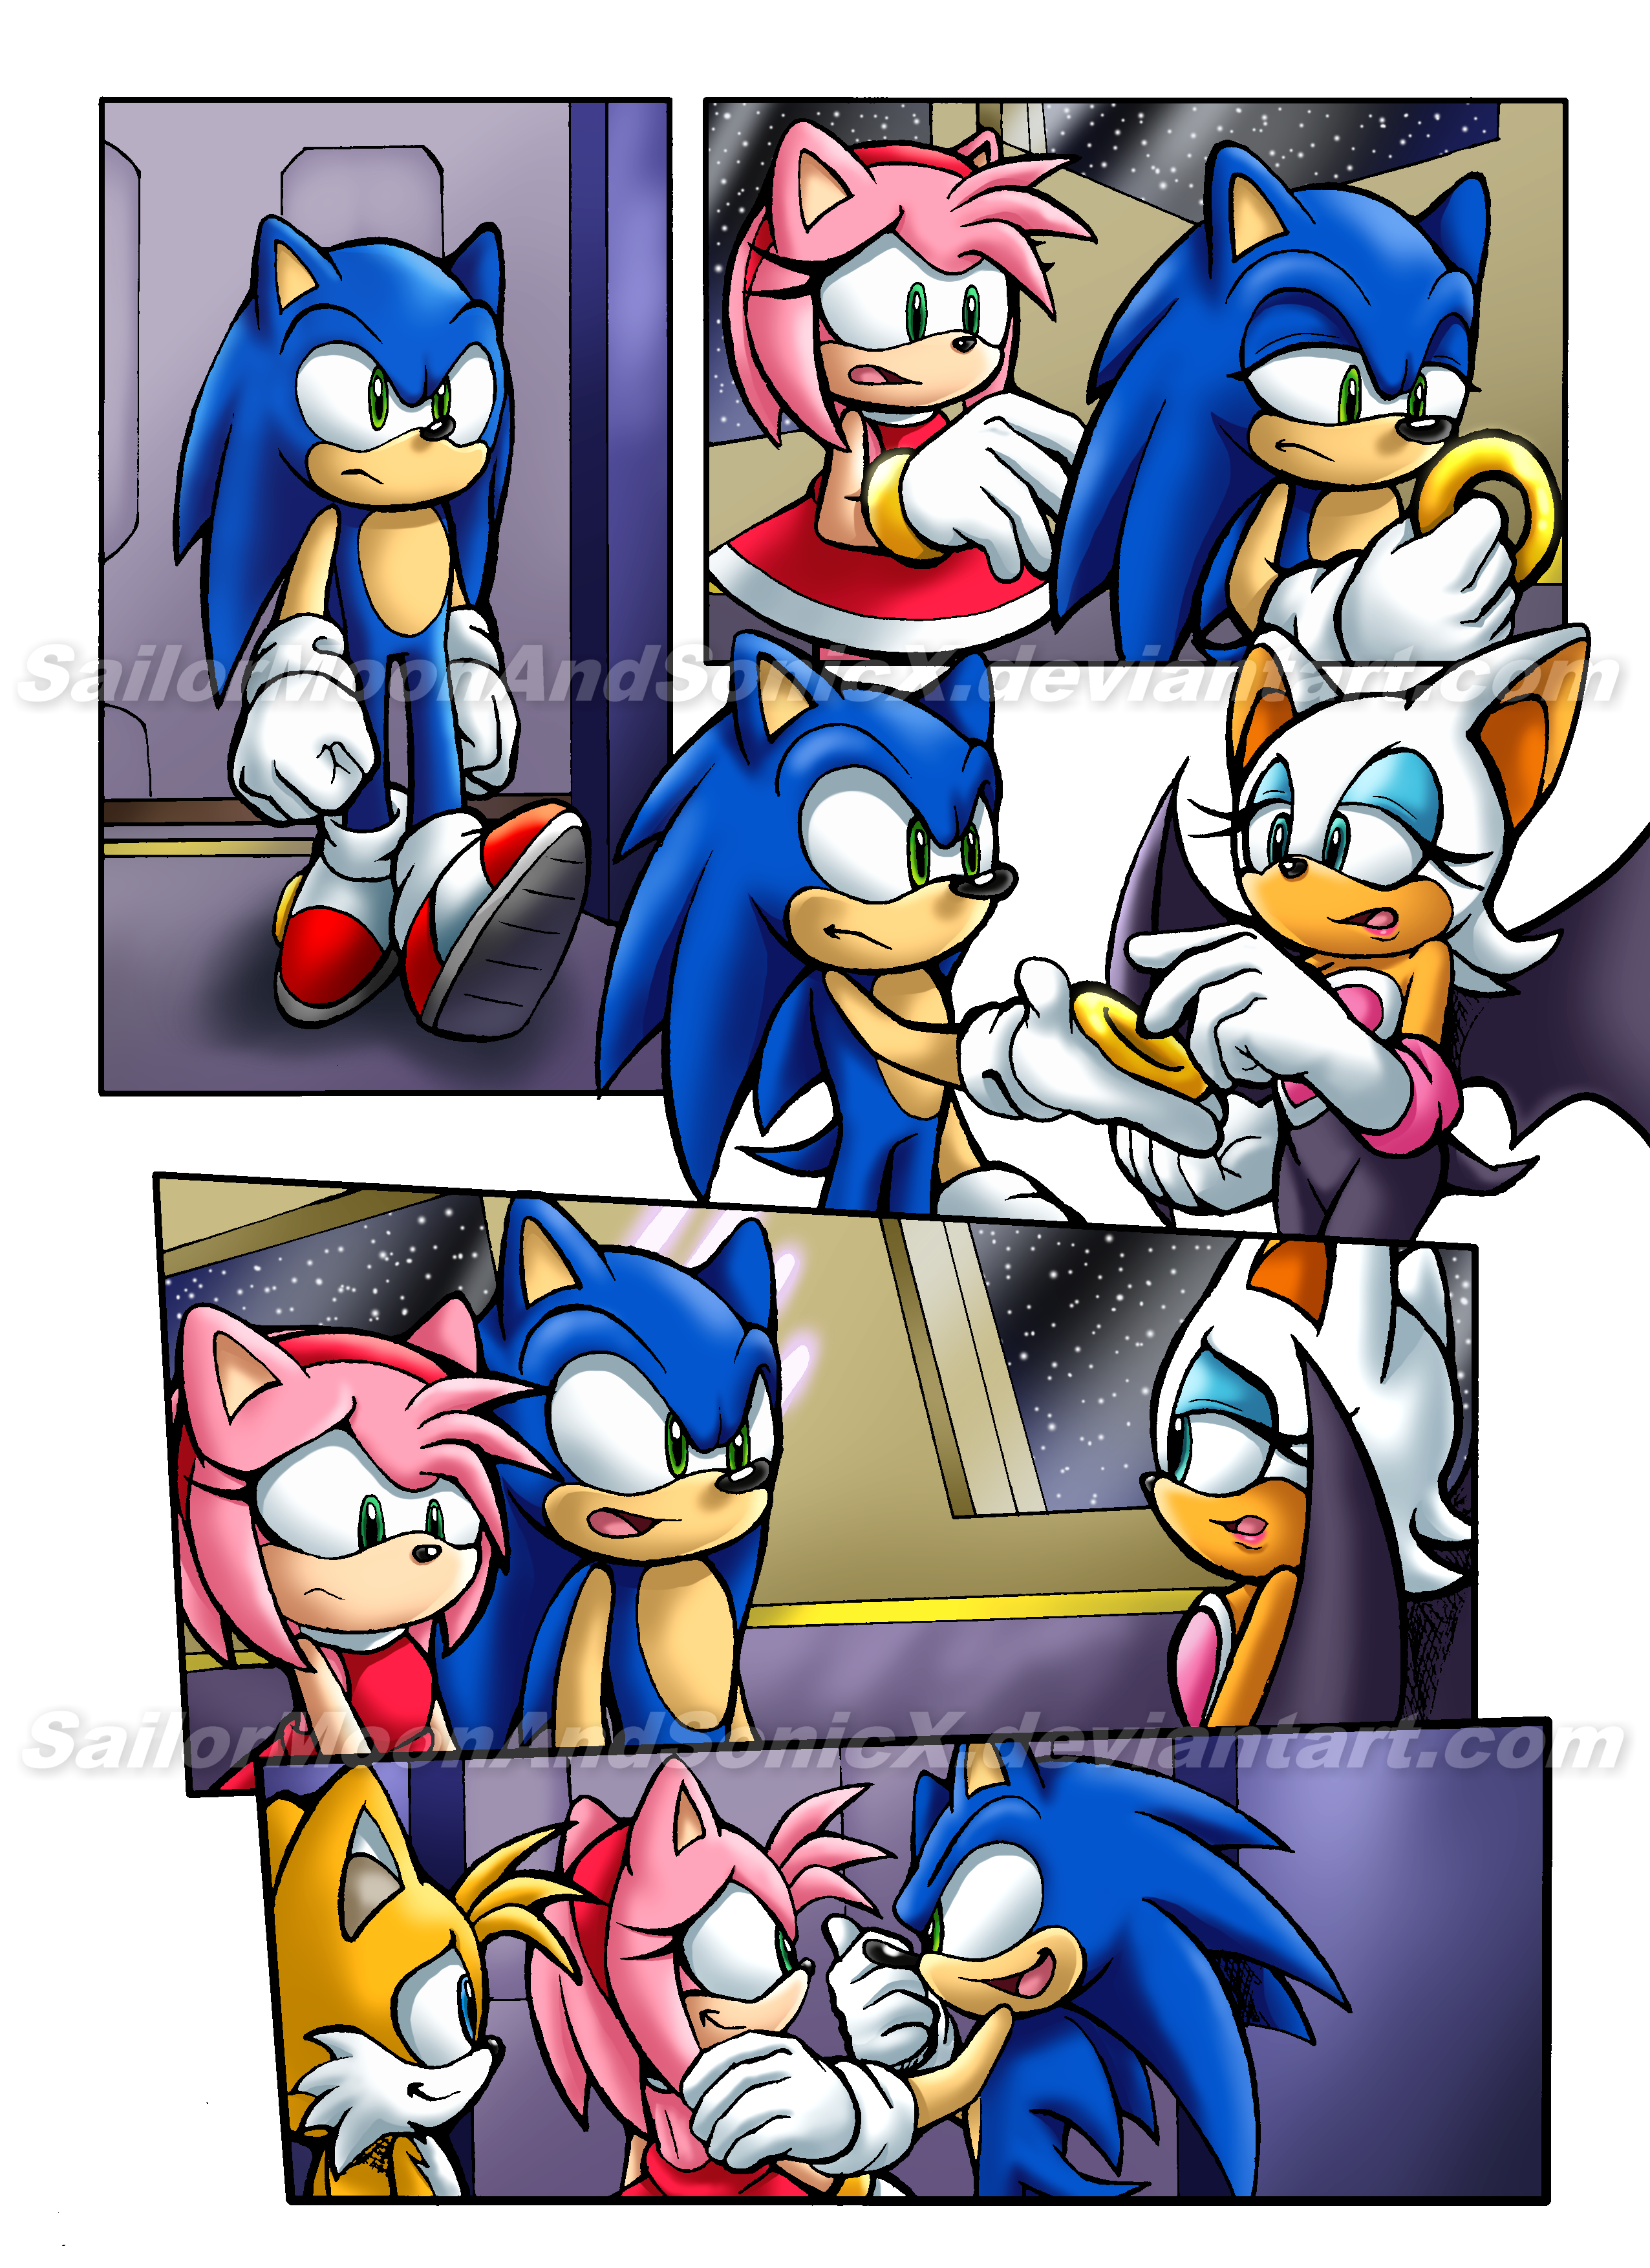 Sonic the Comic STC30 on Twitter Since you all asked so nicely heres a  clean version of the crossover image we collaborated on with SonicOnline  Given Twitter will obviously mangle this youll